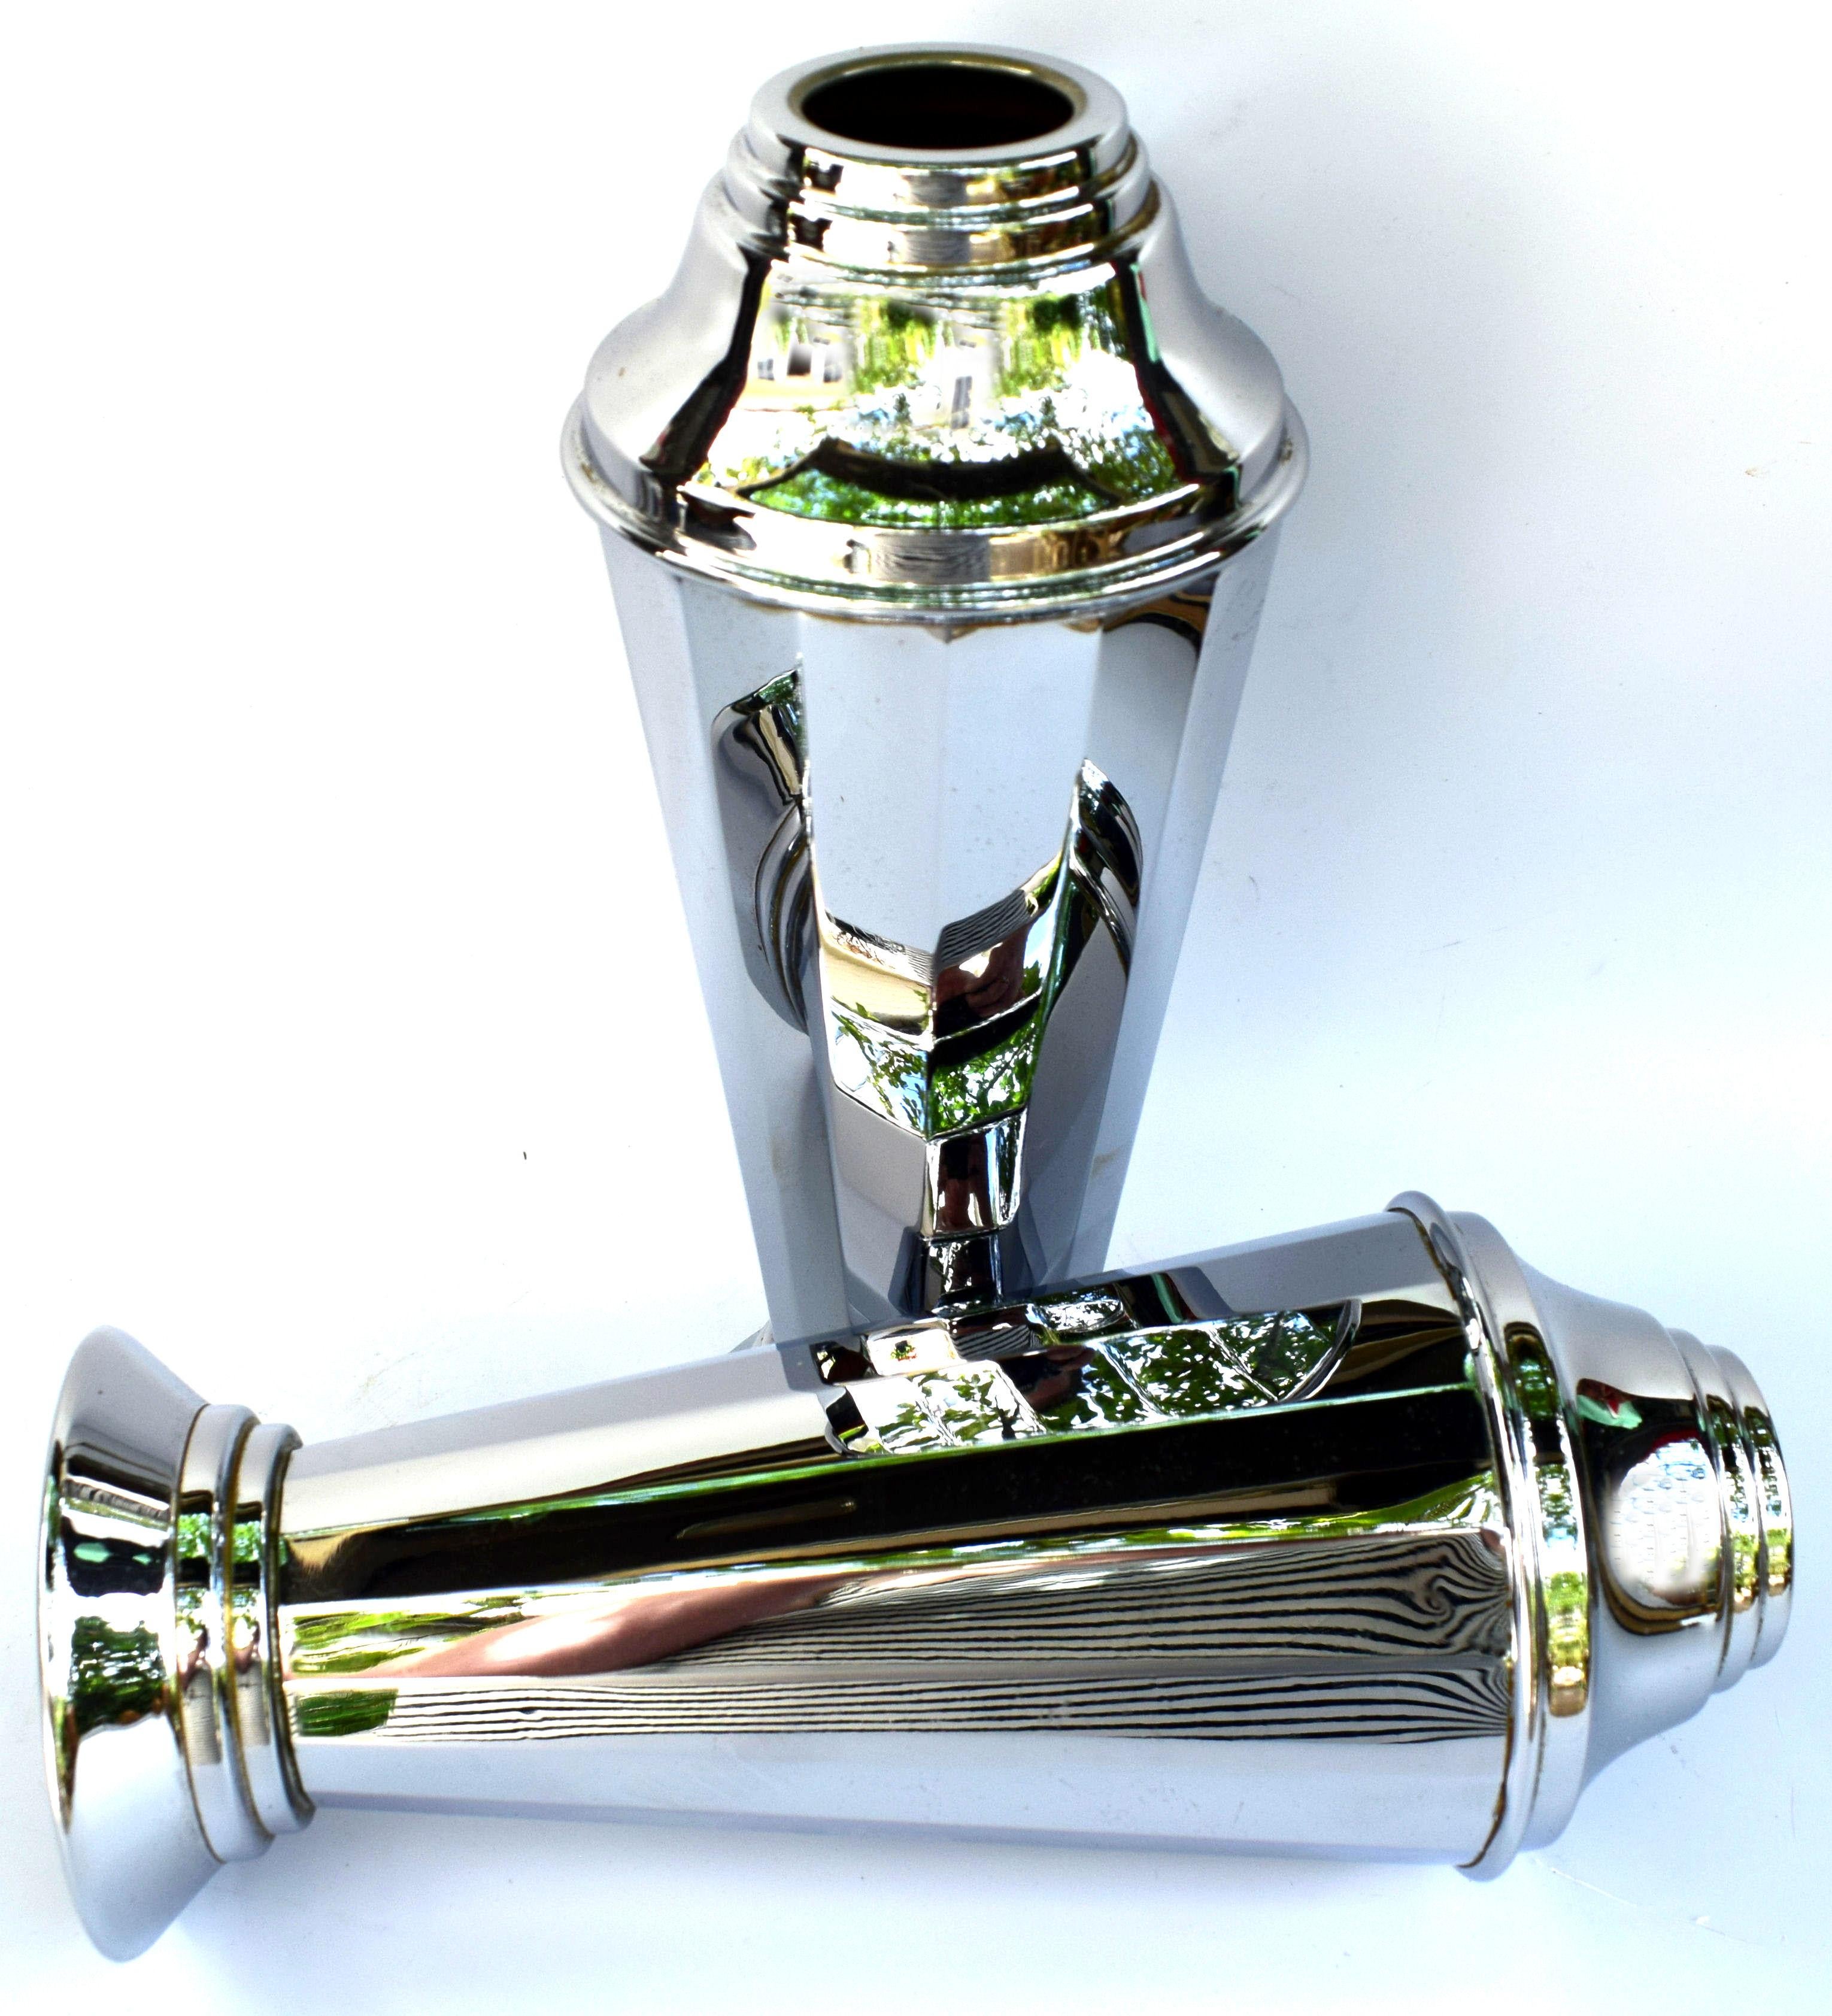 Staple diet of any Deco collection is chrome ware and these are a perfect addition featuring a matching pair of tall Art Deco chrome conical shaped vases with weighted bases. The chrome is in excellent condition showing only minor signs of use and